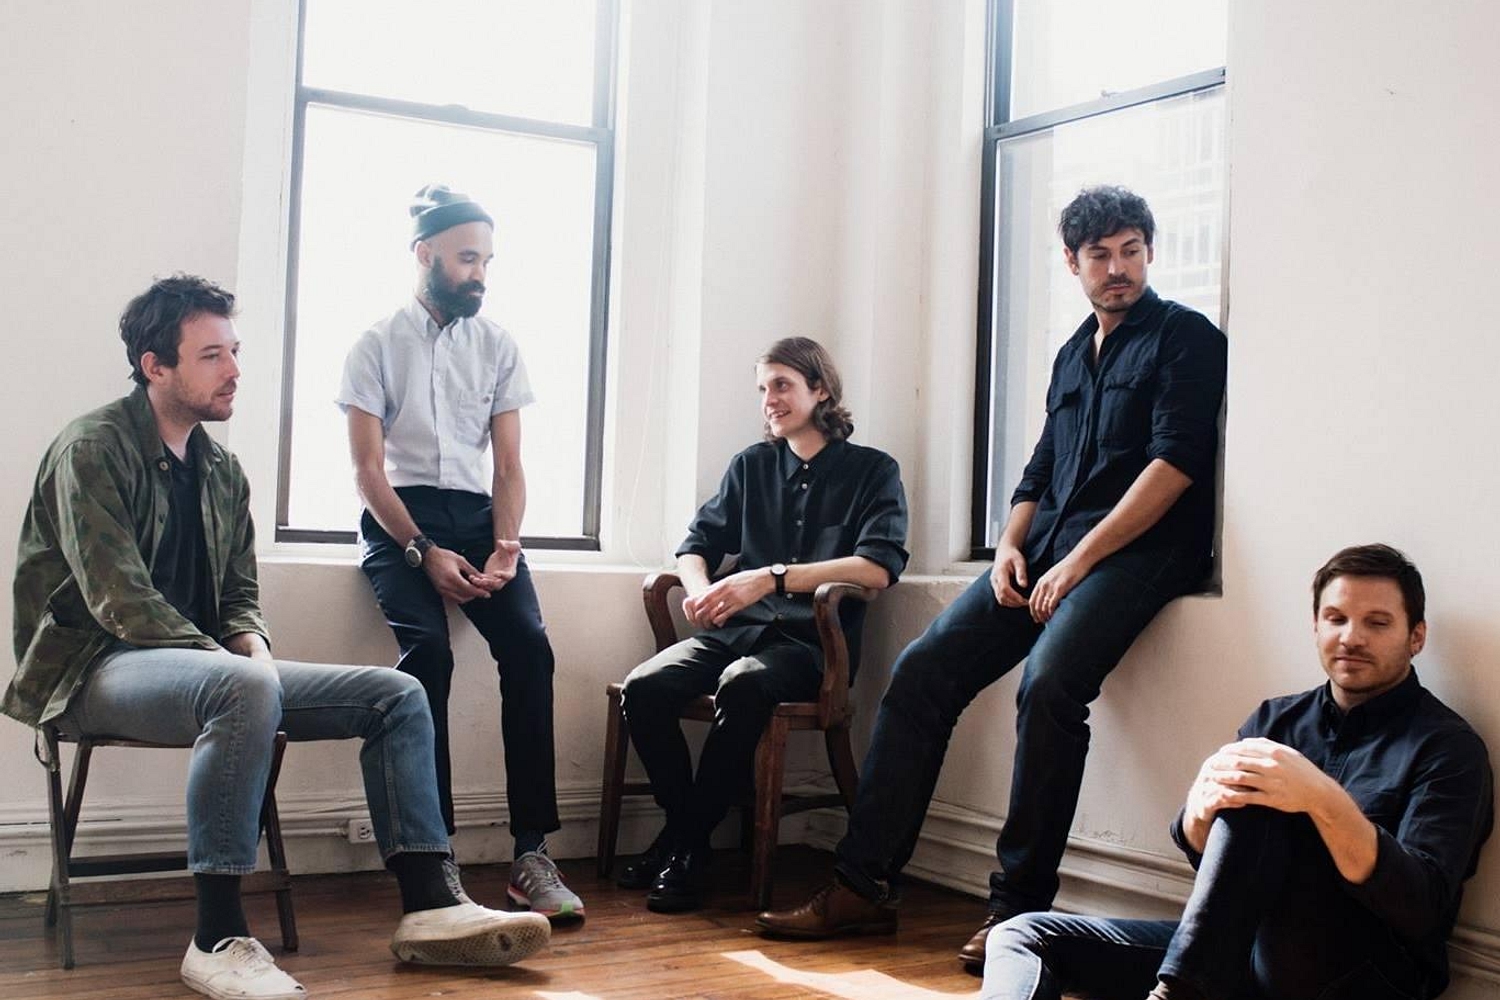 Fleet Foxes share ‘If You Need To, Keep Time On Me’ video